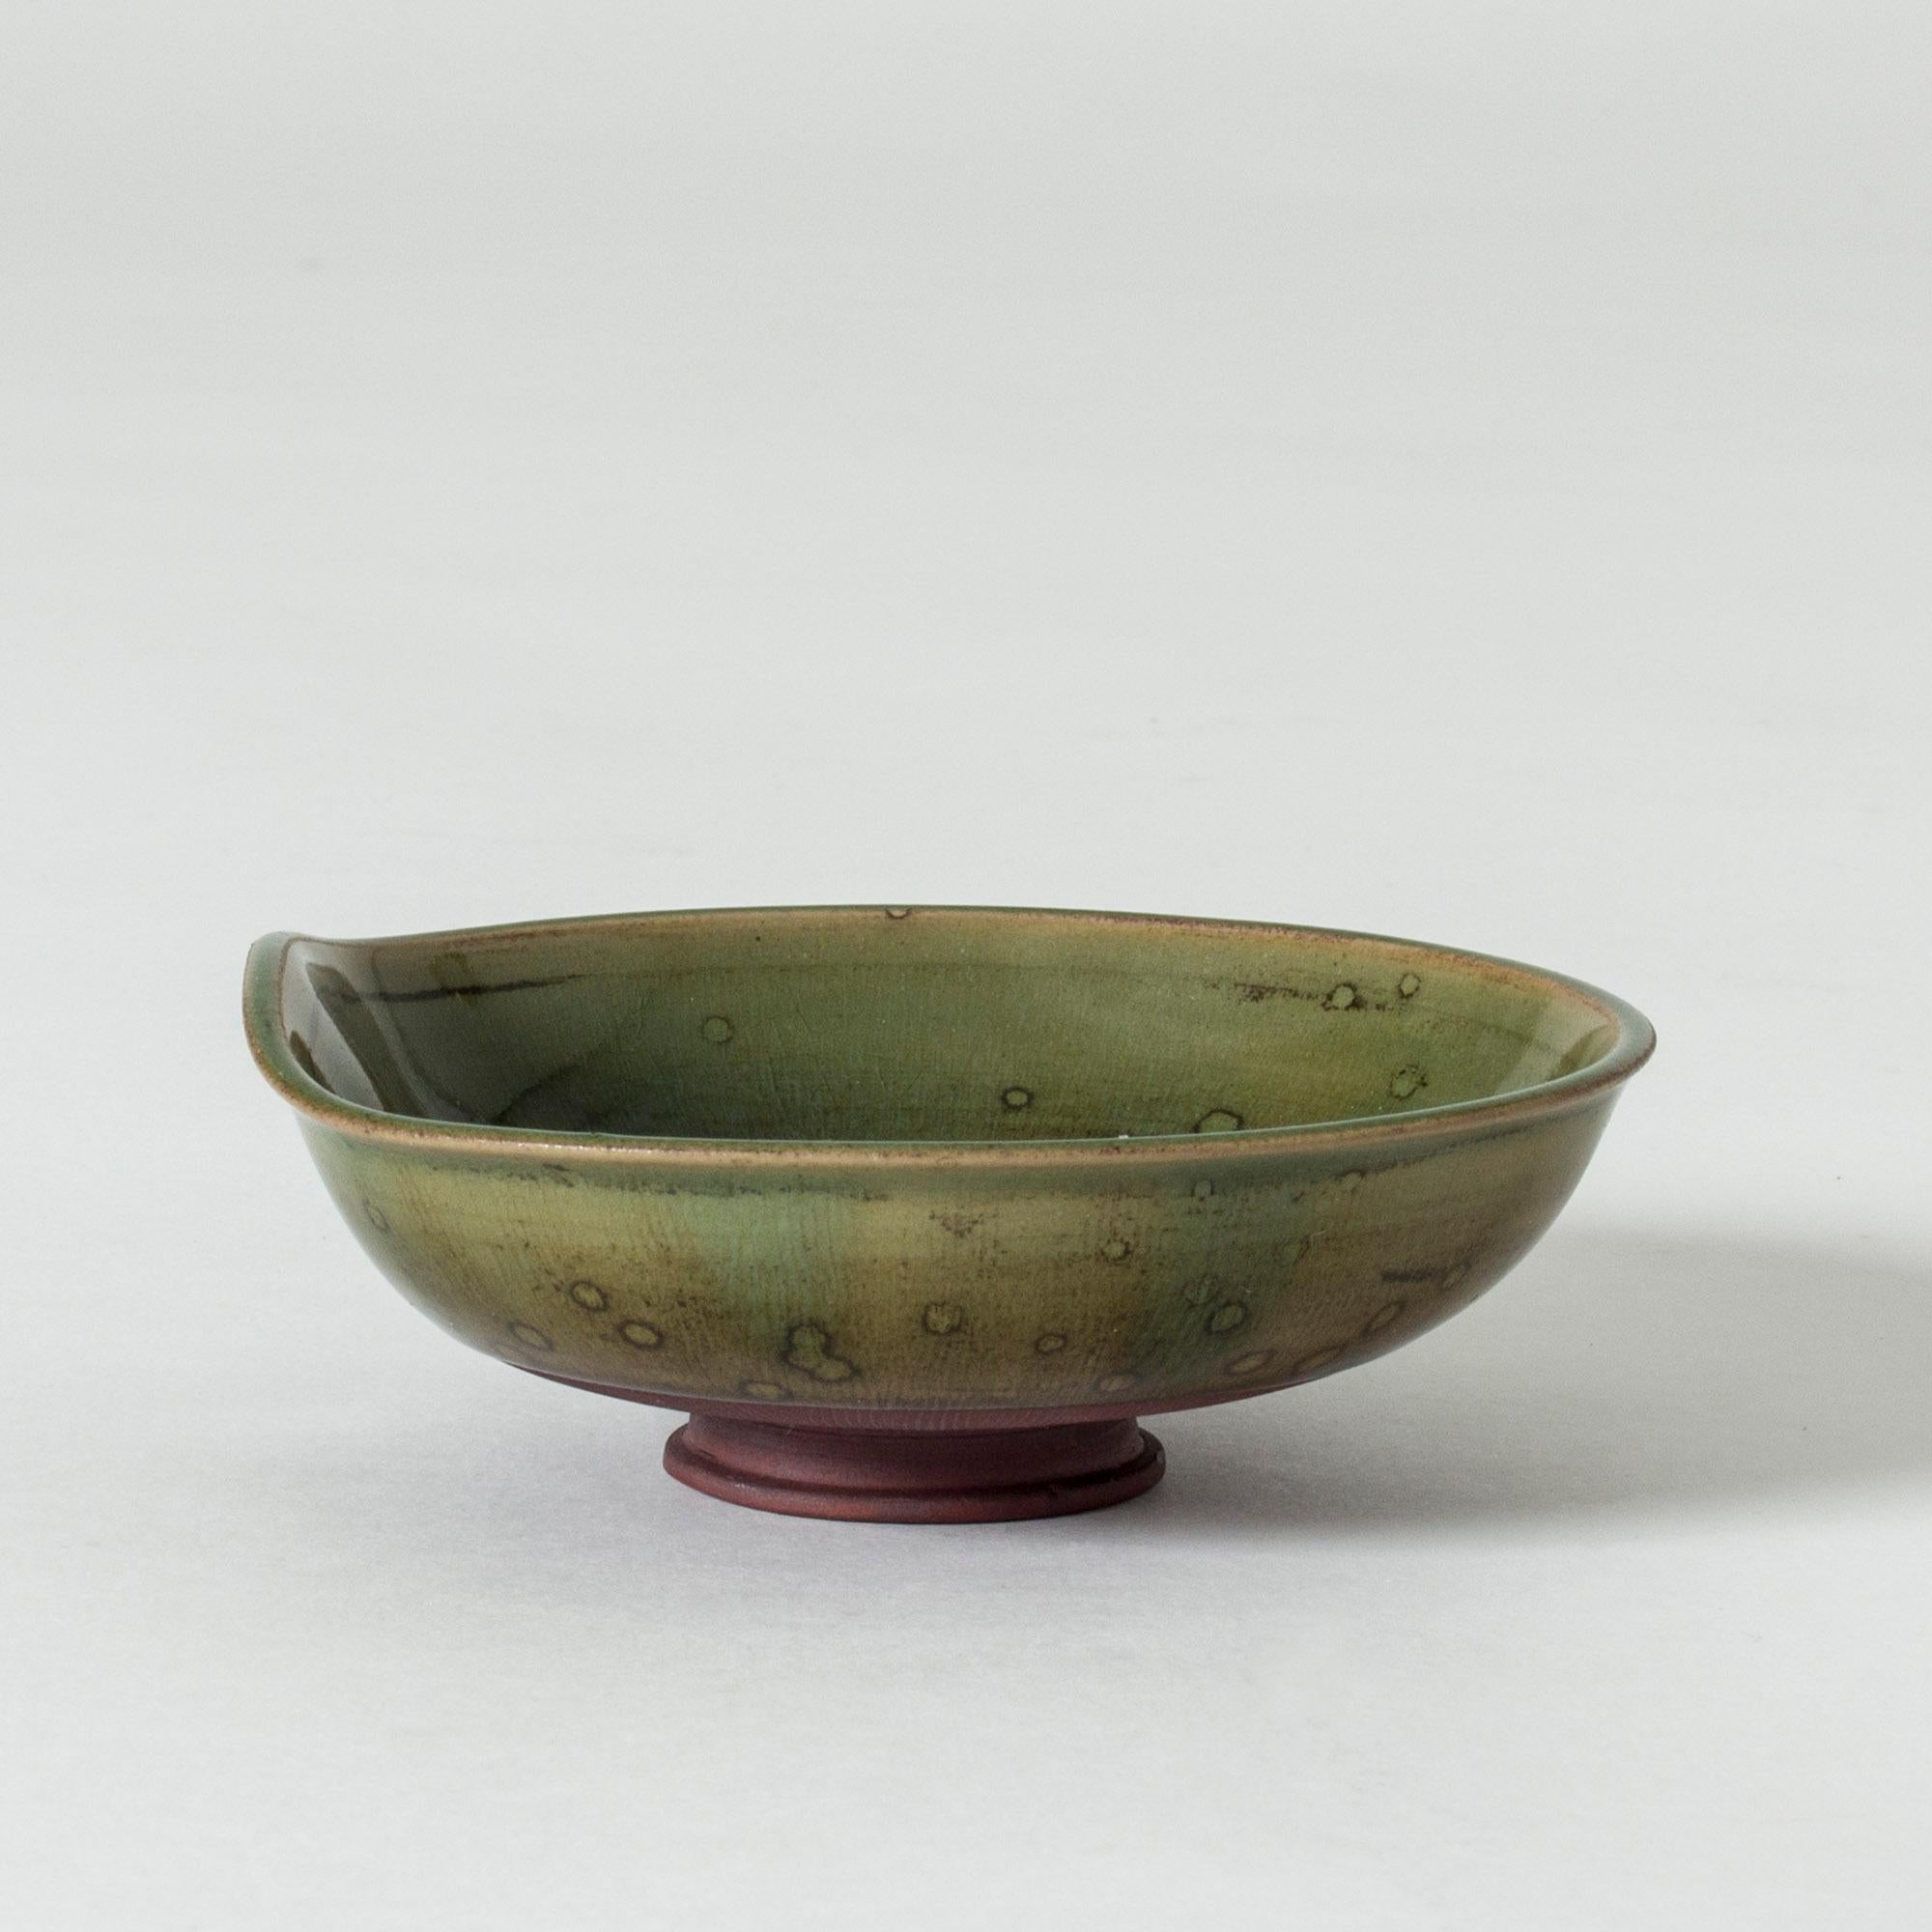 Beautiful, small “Farsta” bowl by Wilhelm Kåge, with an earthy green glaze. The shape is reminiscent of a water lilly leaf.

“Farsta” stoneware is recognized as being the best and most exclusive that has come out of Swedish Arts & Crafts. The